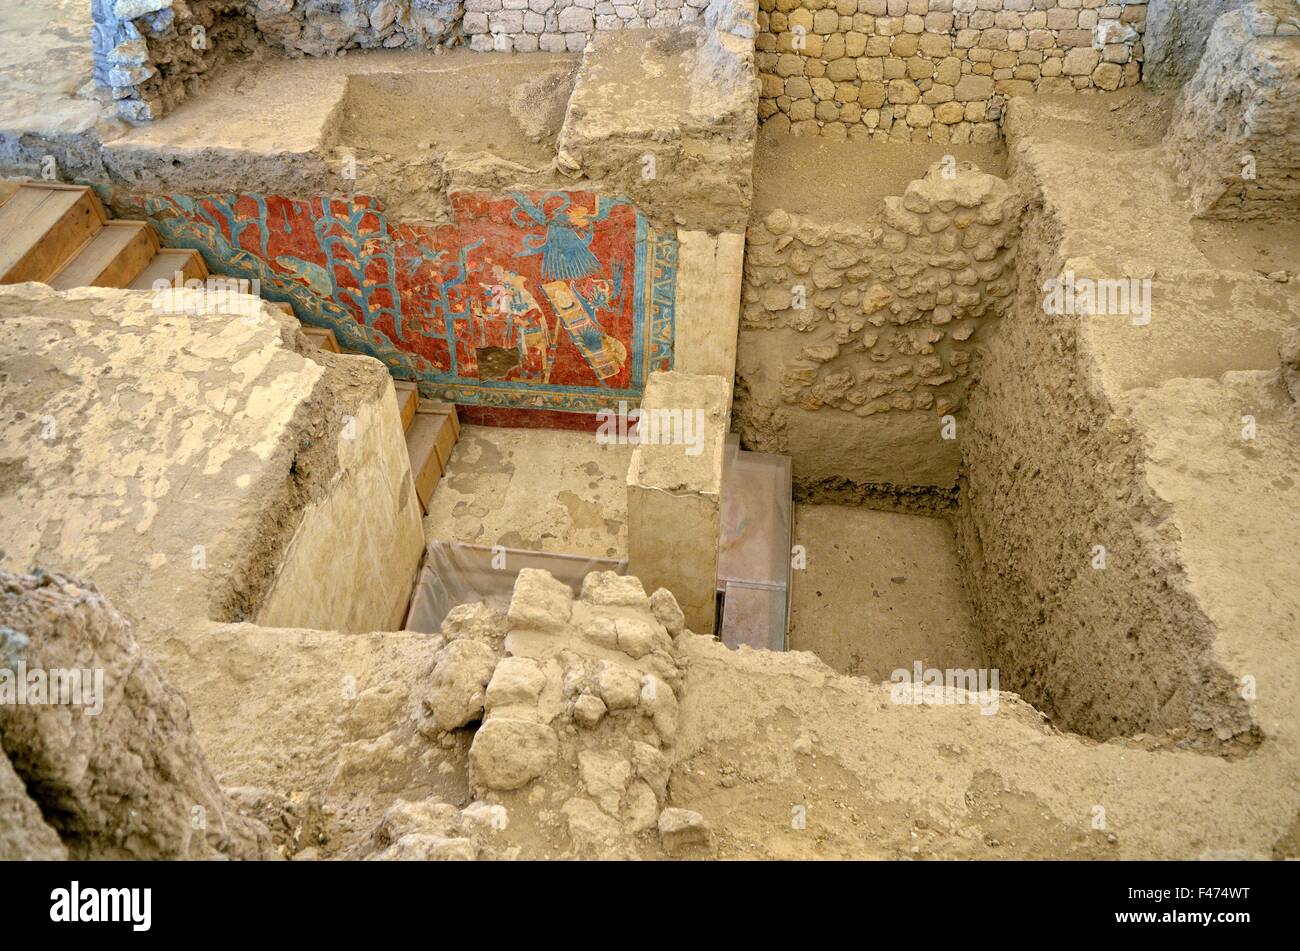 Dug out area with wall paintings, archaeological site in Tlaxcala Cacaxtla, state of Tlaxcala, Mexico Stock Photo